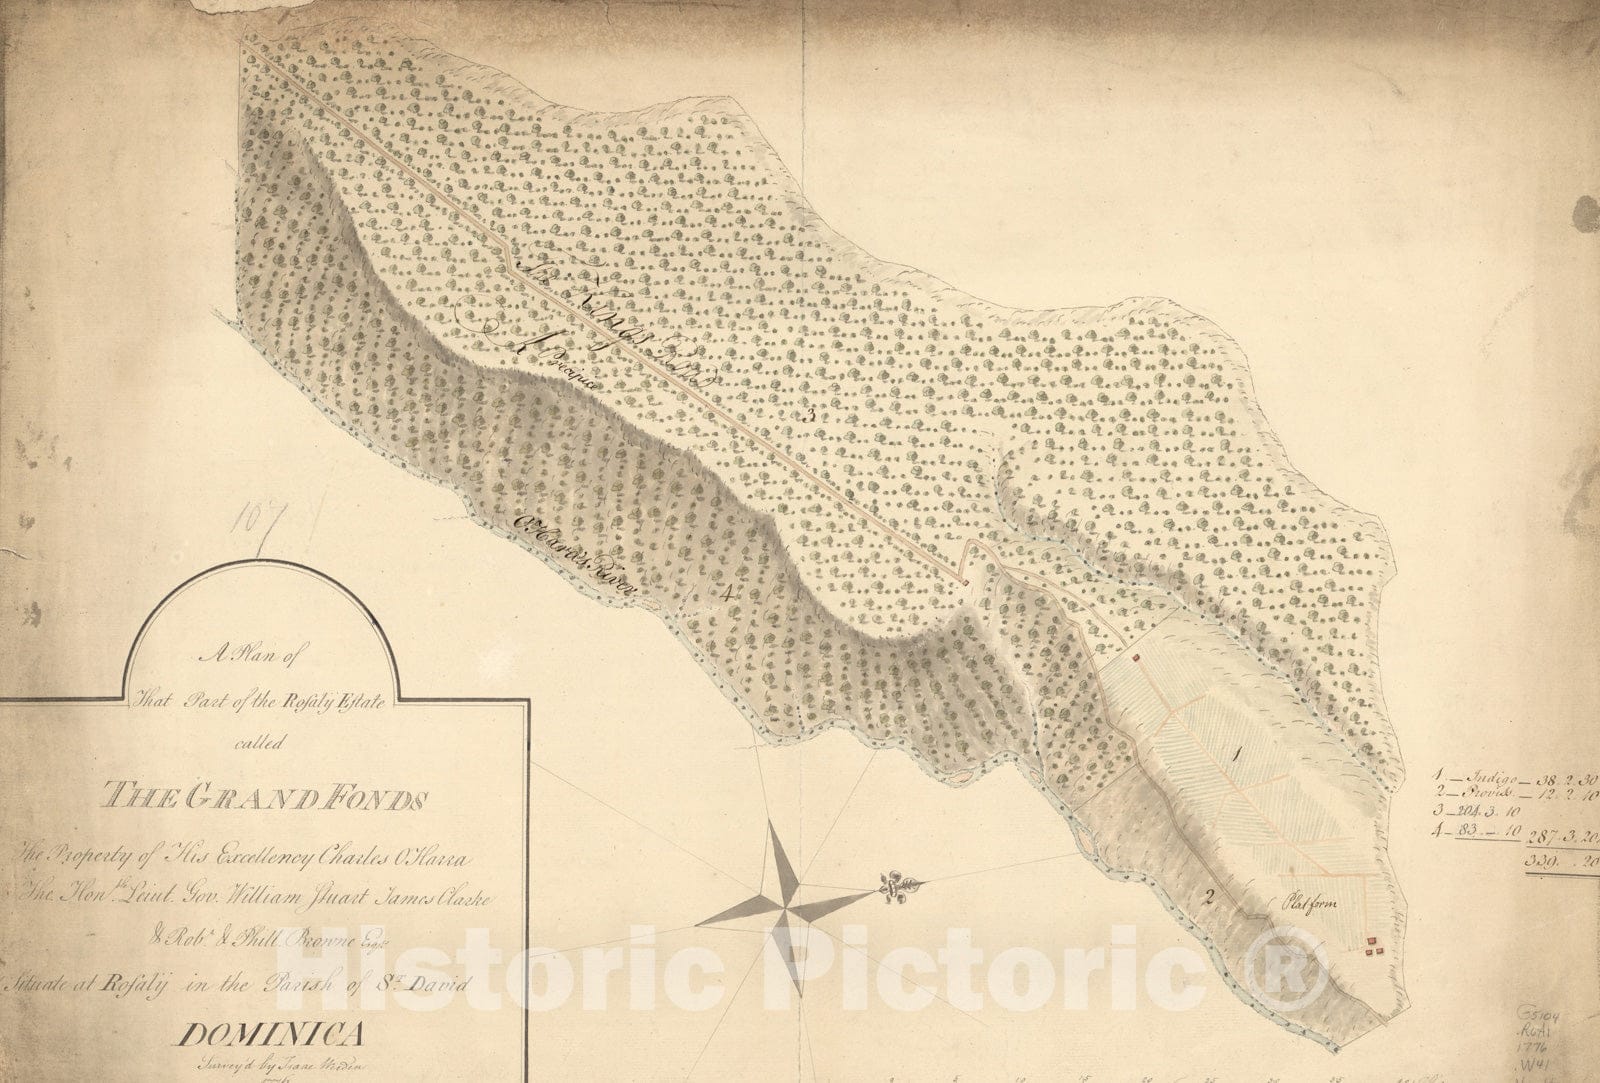 Historical Map, 1776 A Plan of That Part of The Rosalij Estate Called The Grand Fonds : The Property of His Excellency Charles O'Harra, The Honble, Vintage Wall Art